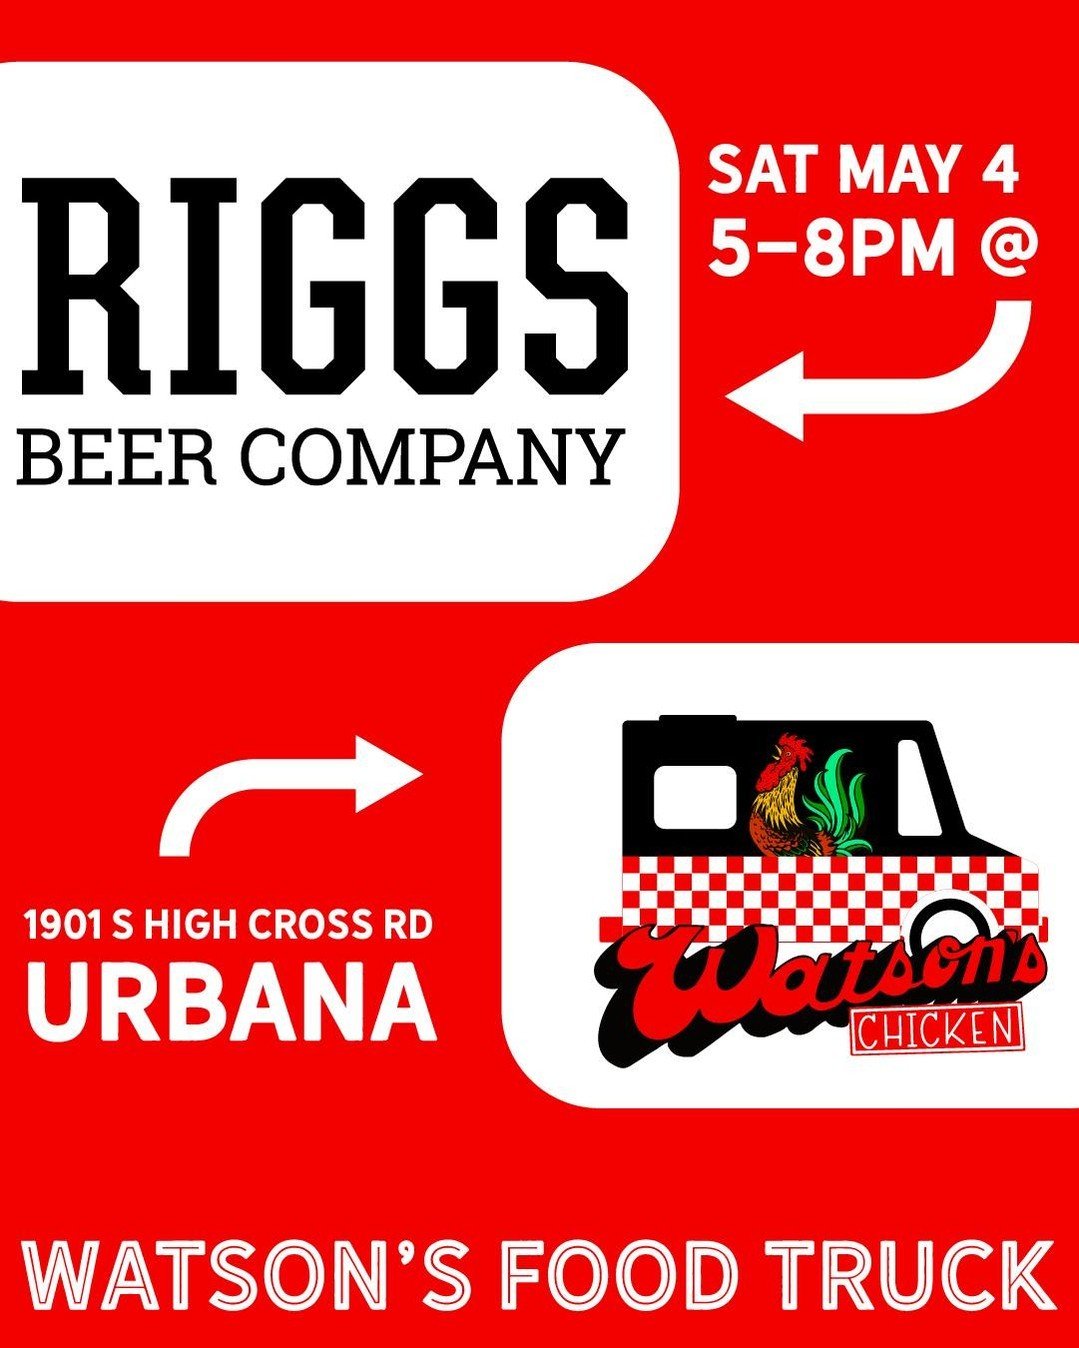 It's back to @riggs_beer_company for Saturday May 4th!